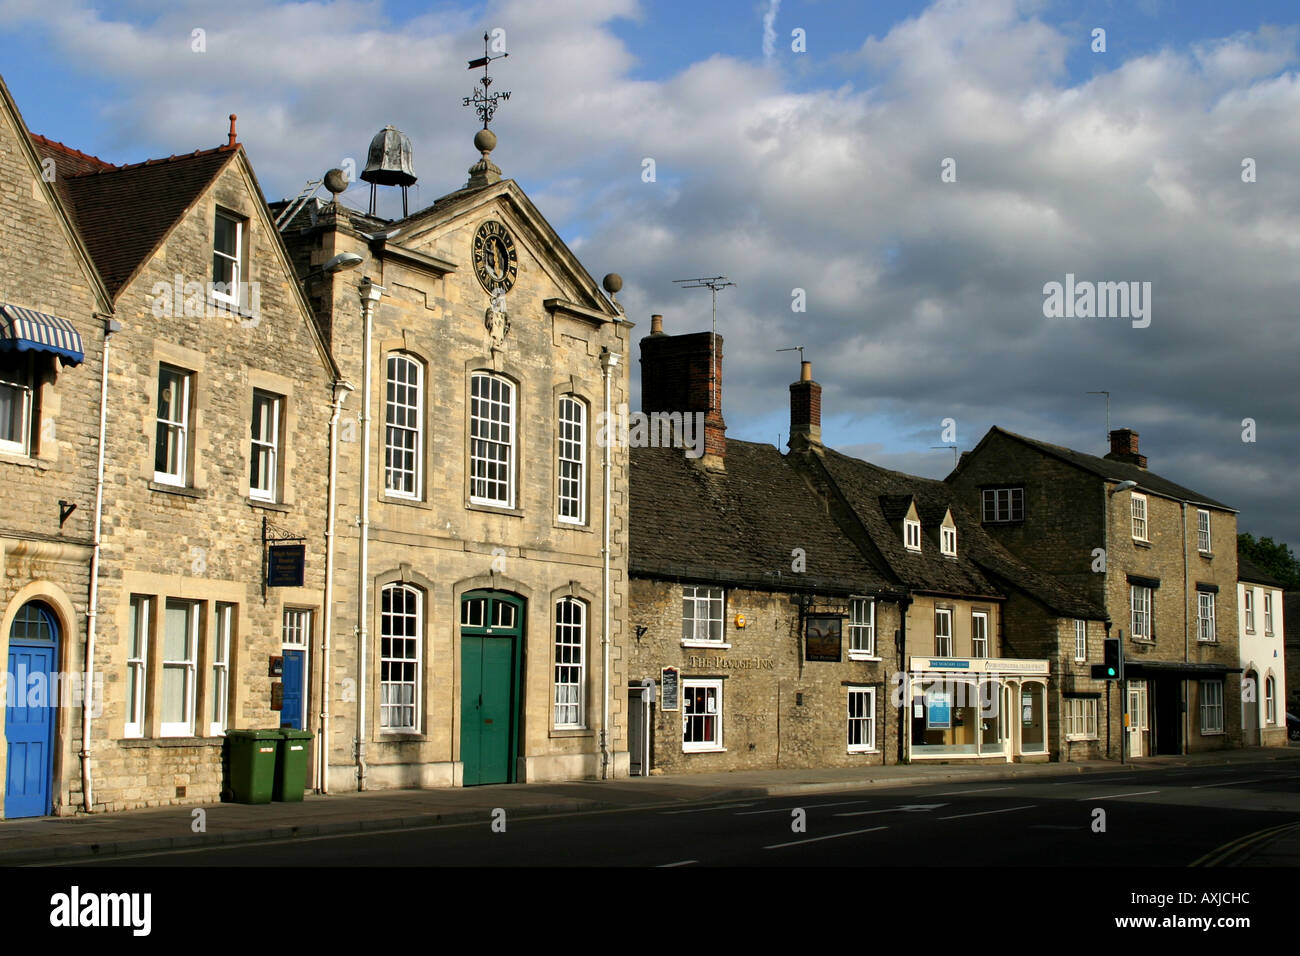 Picturesque old buildings in Witney, West Oxfordshire in the Cotswolds. Stock Photo